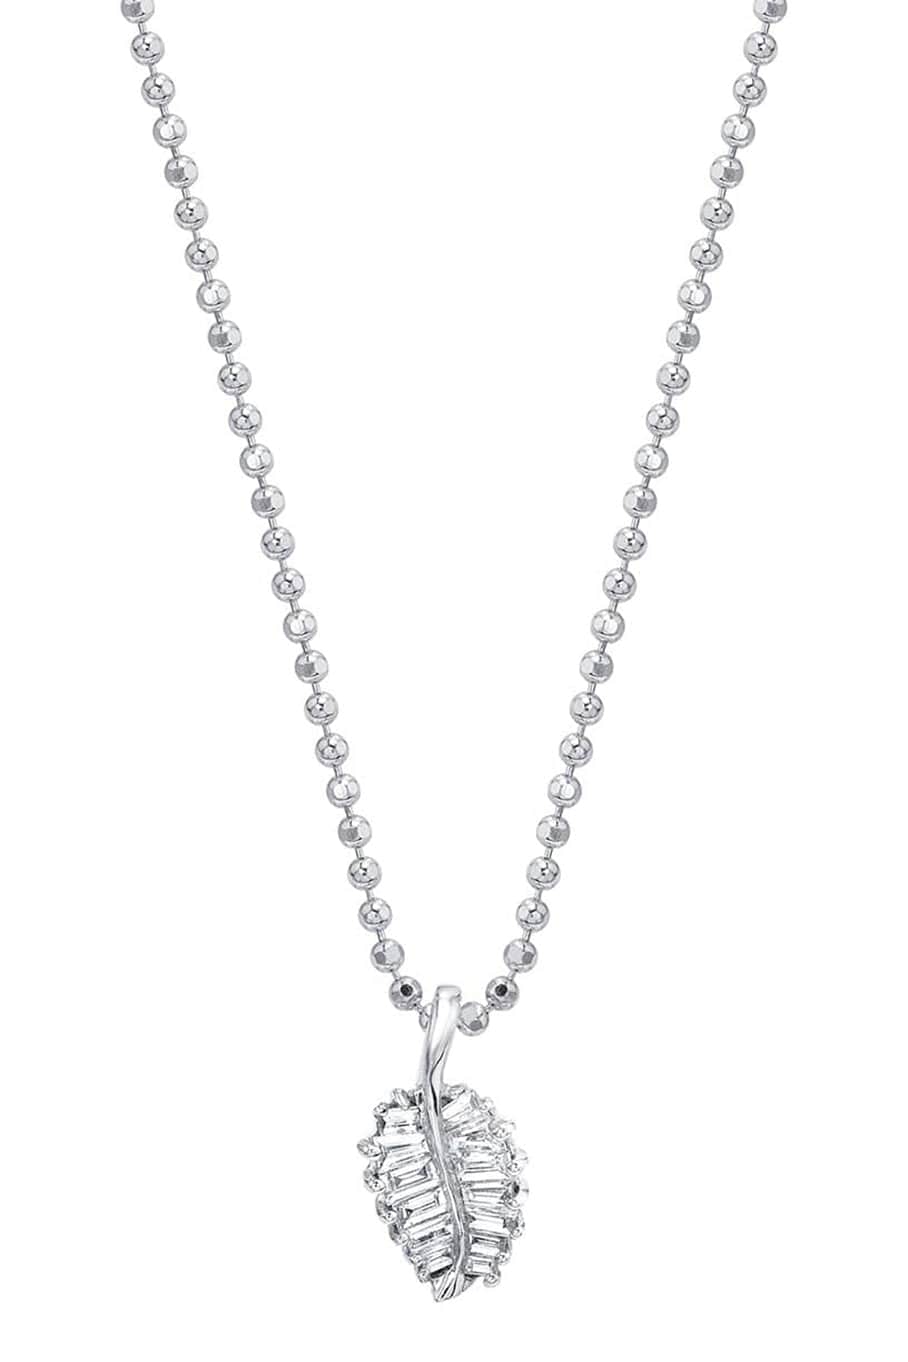 ANITA KO-White Gold Small Palm Leaf Baguette Necklace-WHITE GOLD